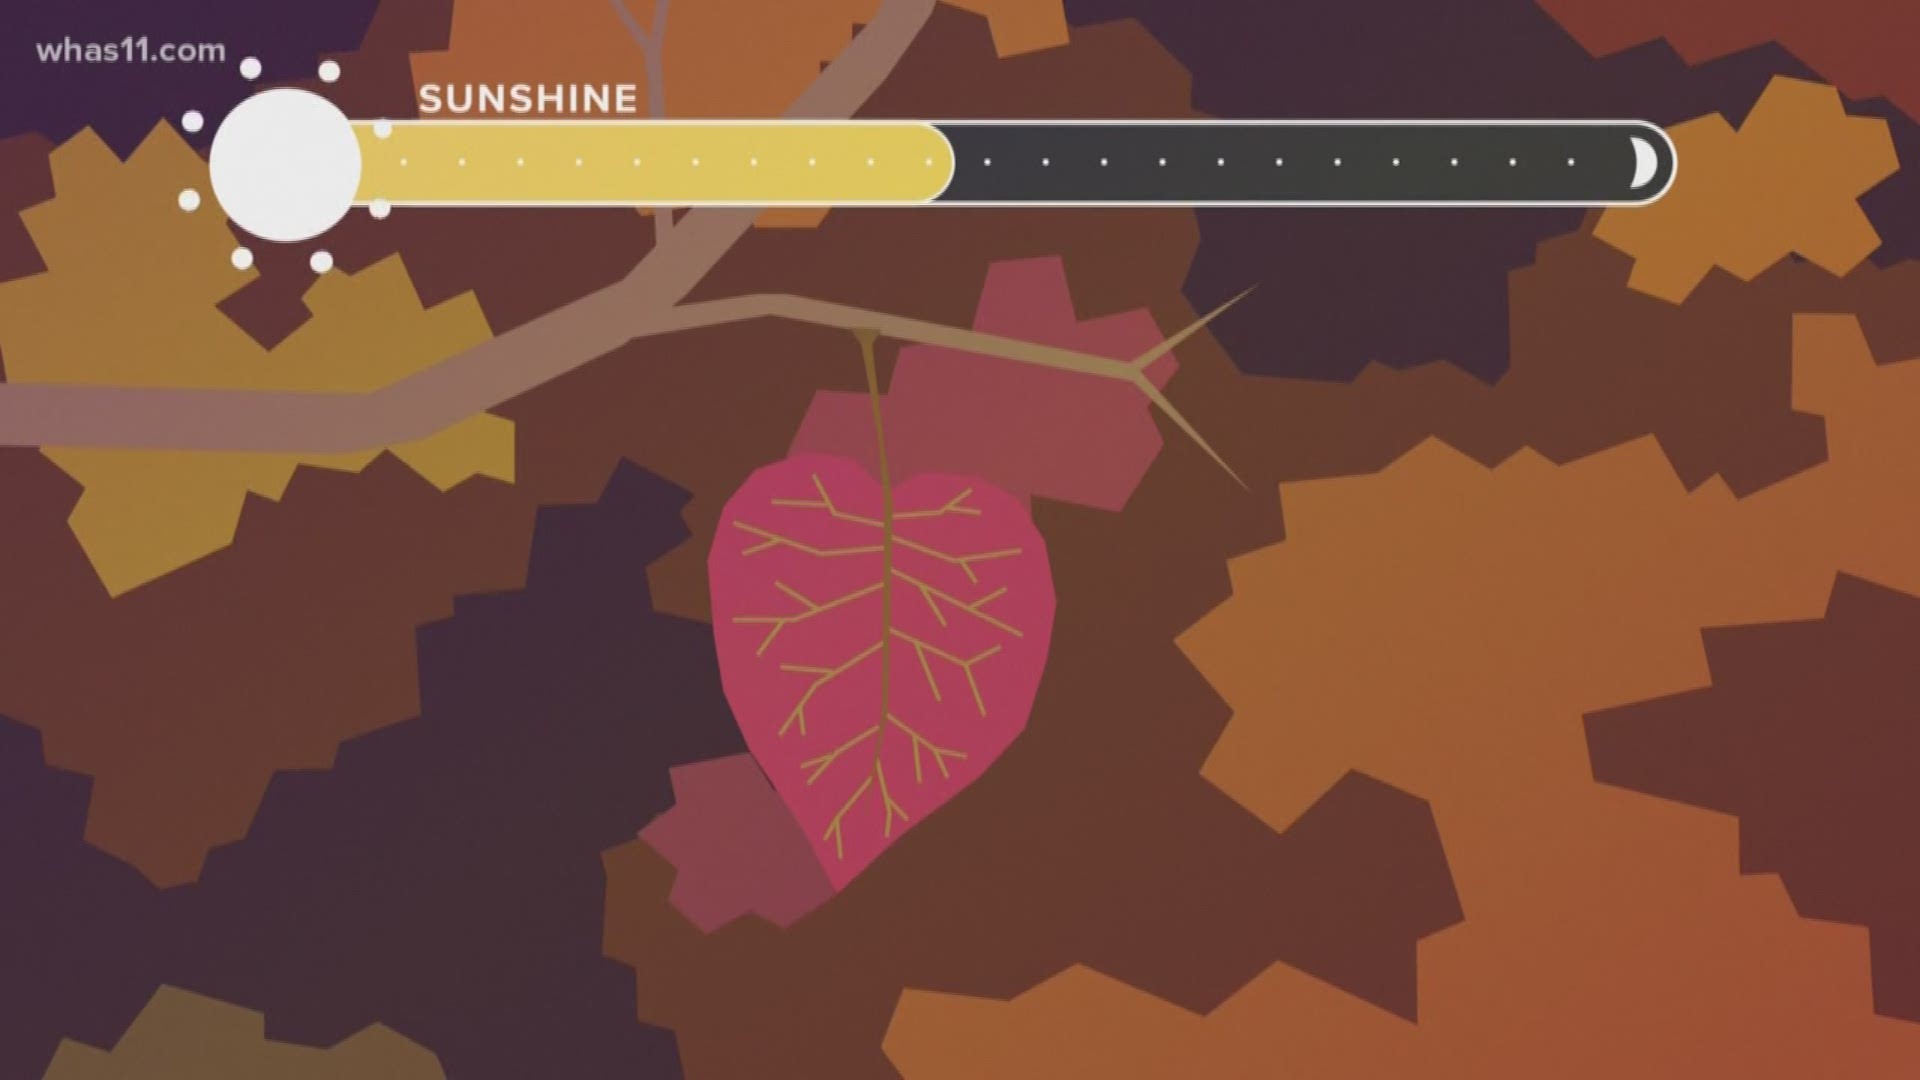 Experts believe the Louisville area will not see colorful fall leaves due to our current drought.